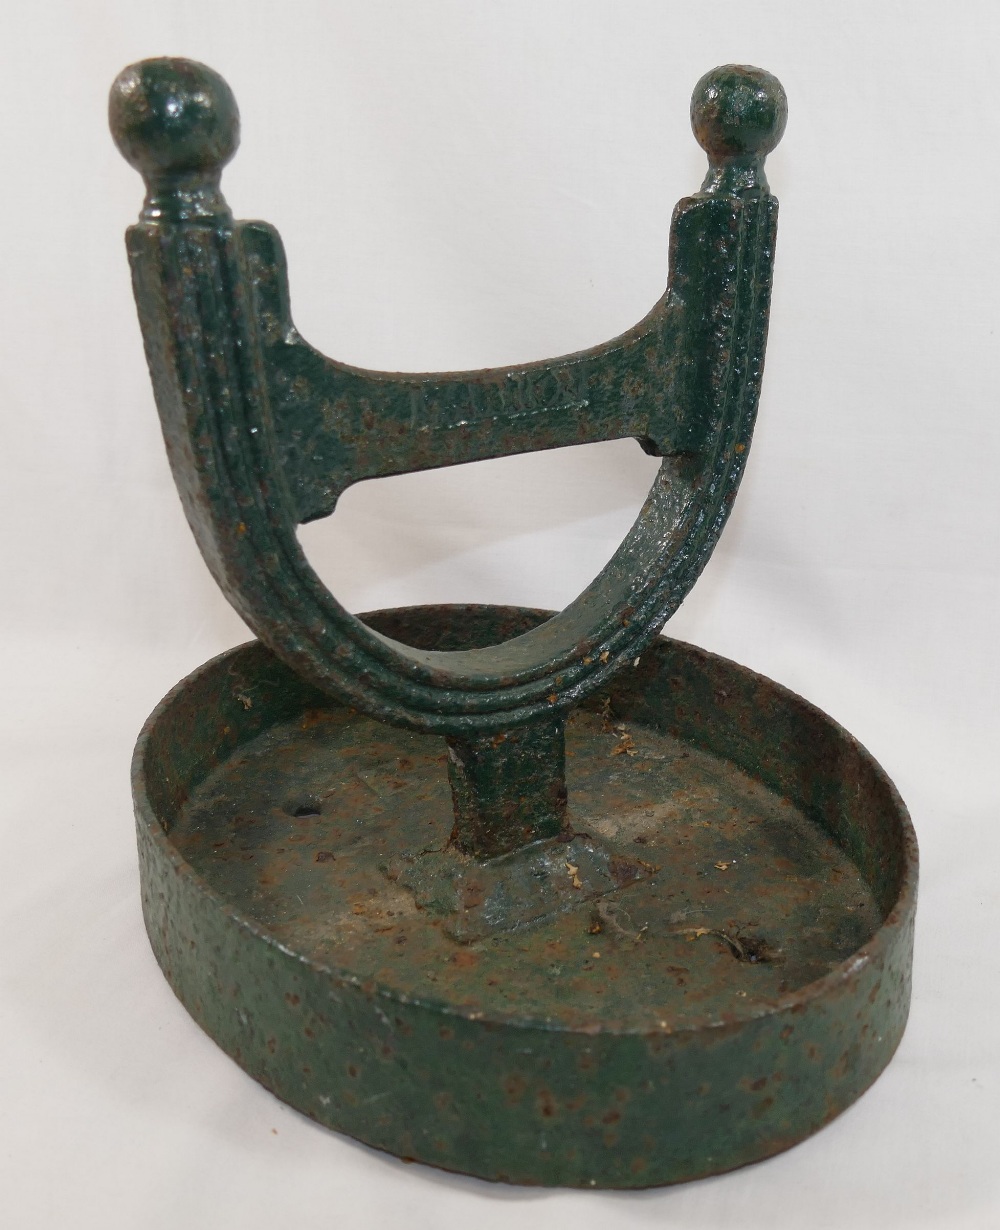 A 19th century Scottish green painted cast iron horseshoe-shaped boot scraper by Carron Co. of - Image 3 of 3